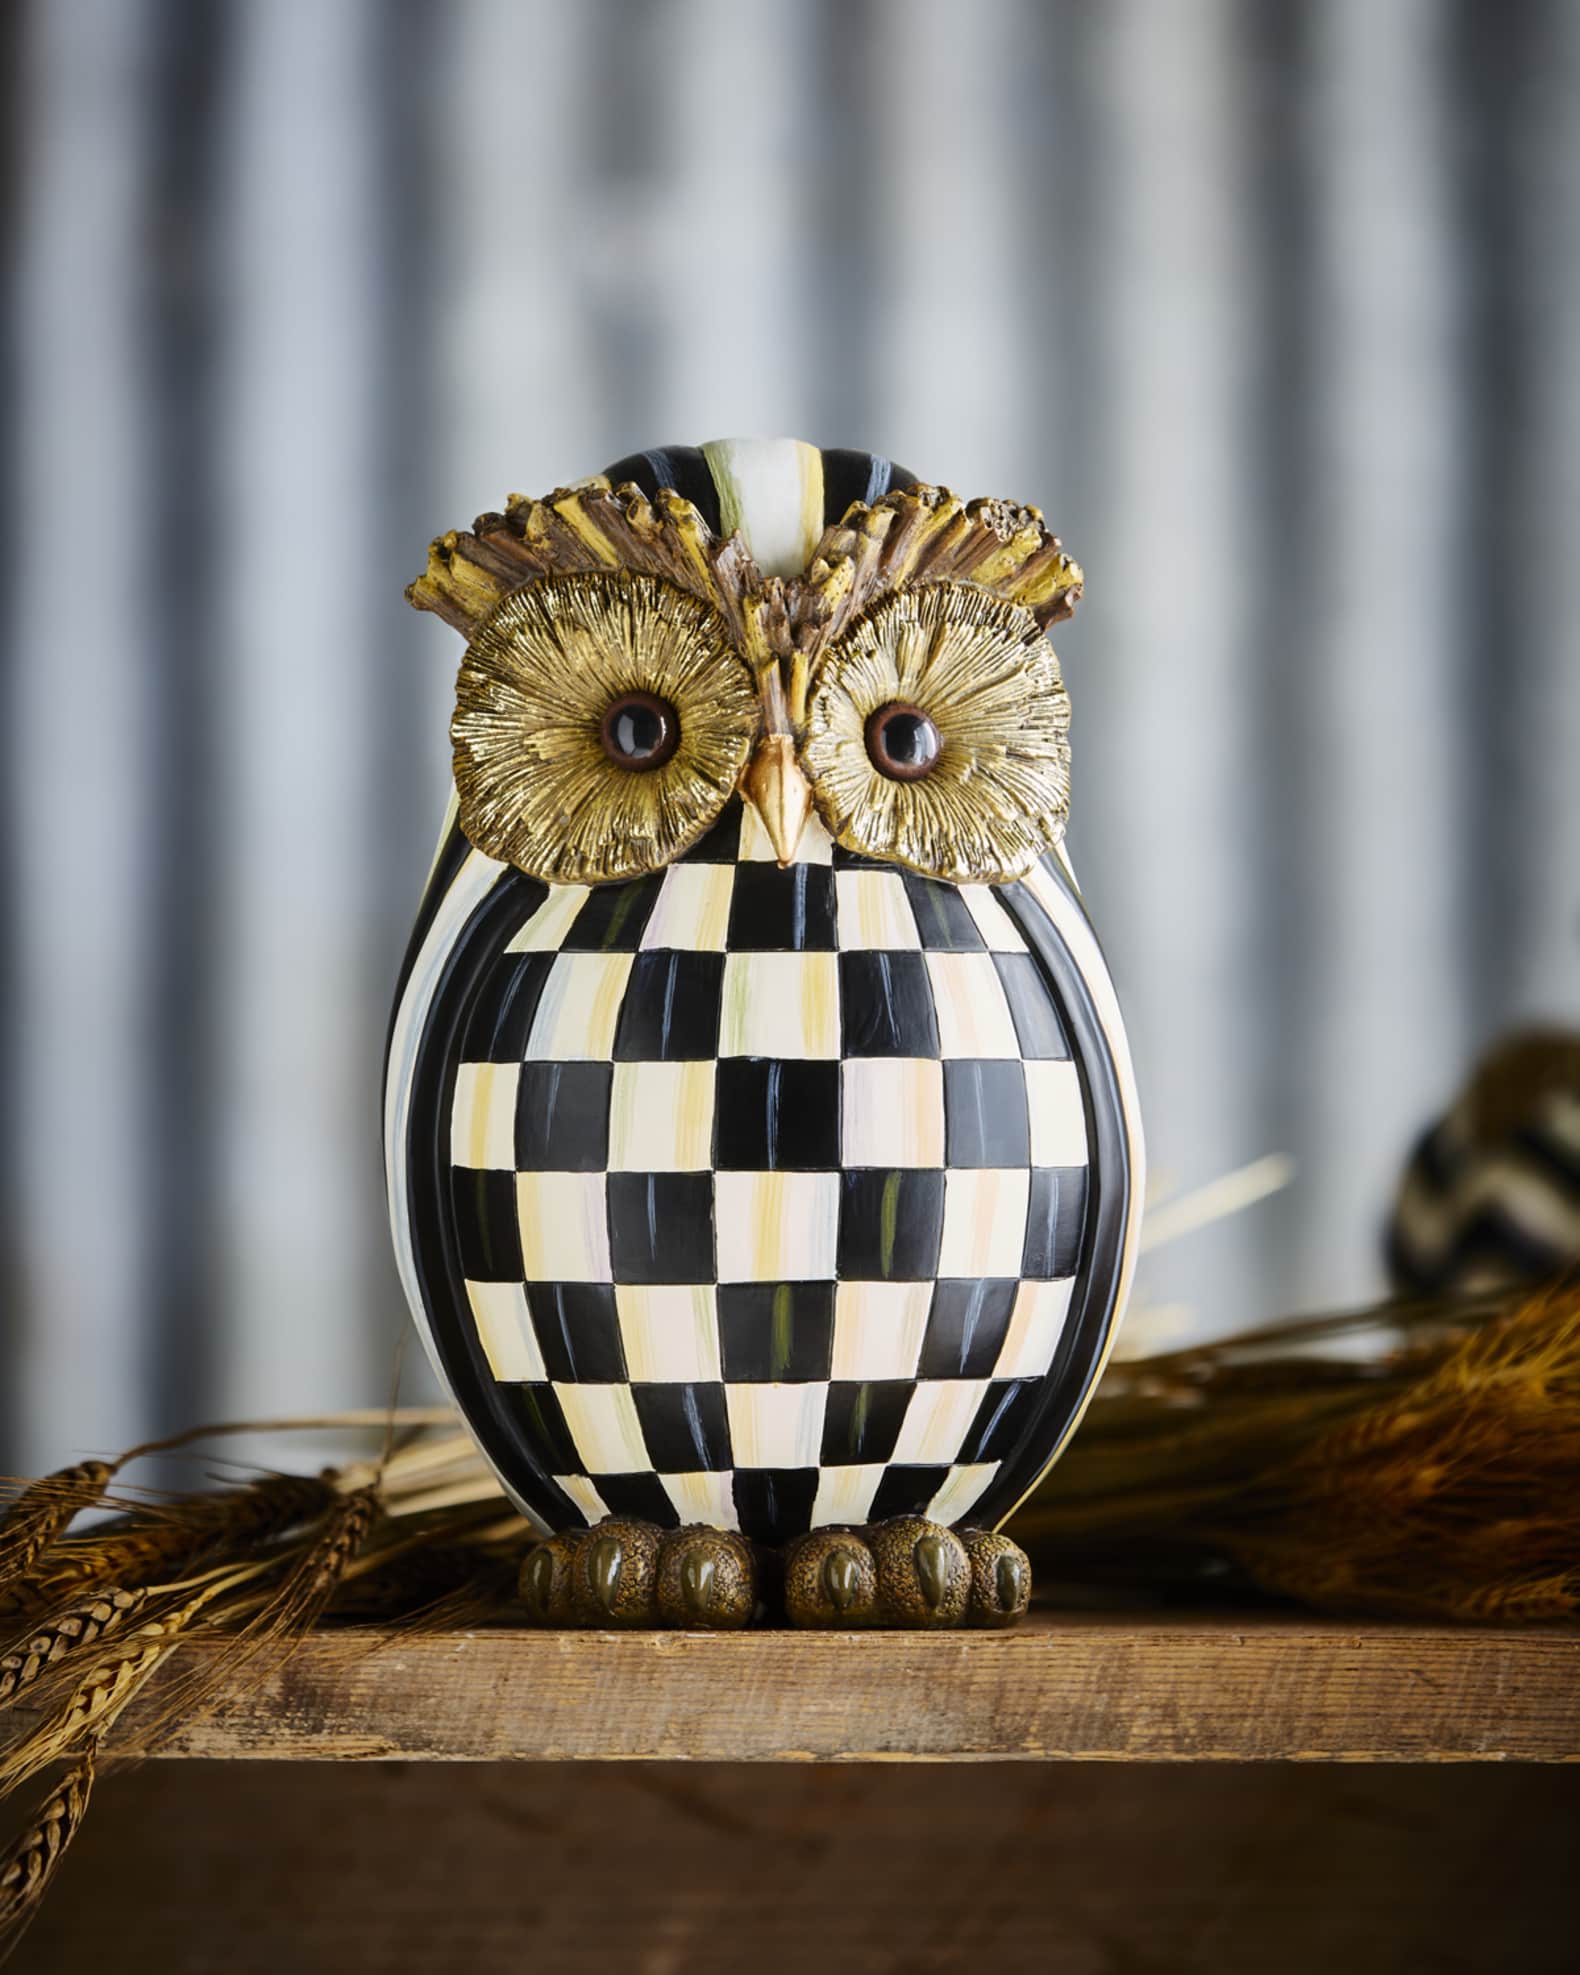 MacKenzie-Childs Courtly Check Owl